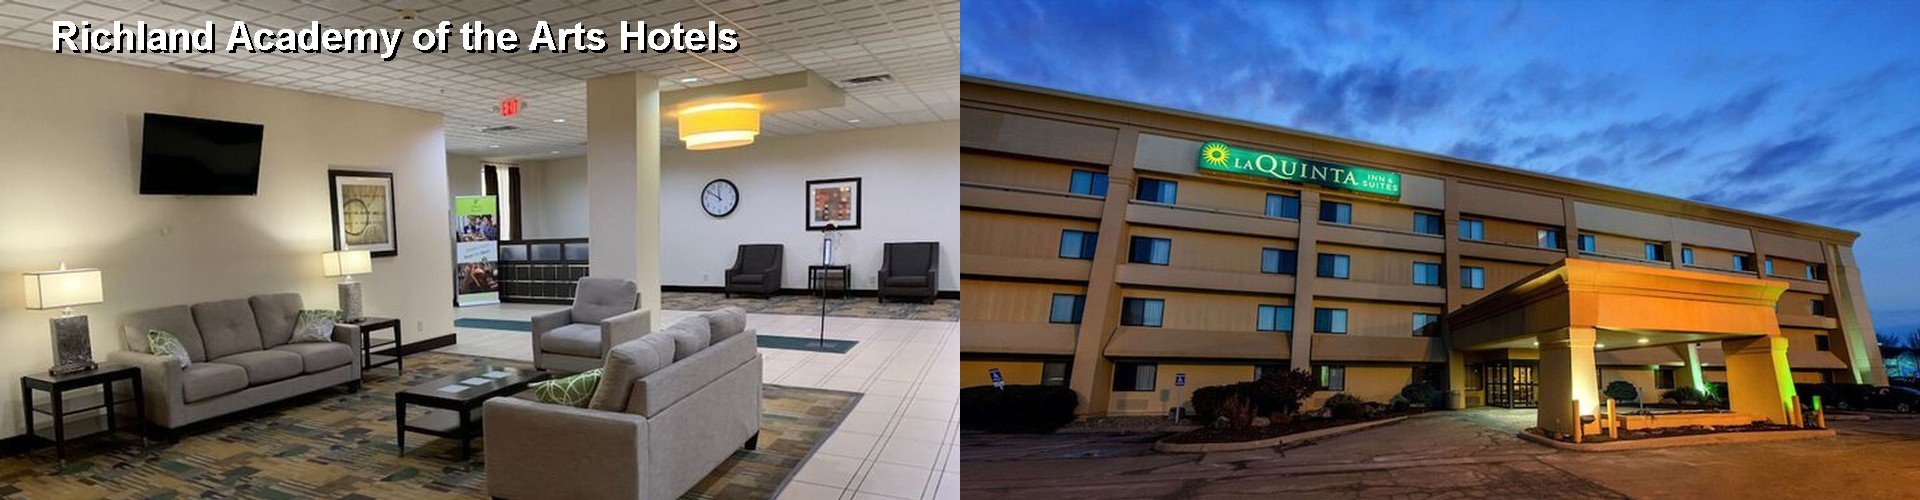 3 Best Hotels near Richland Academy of the Arts